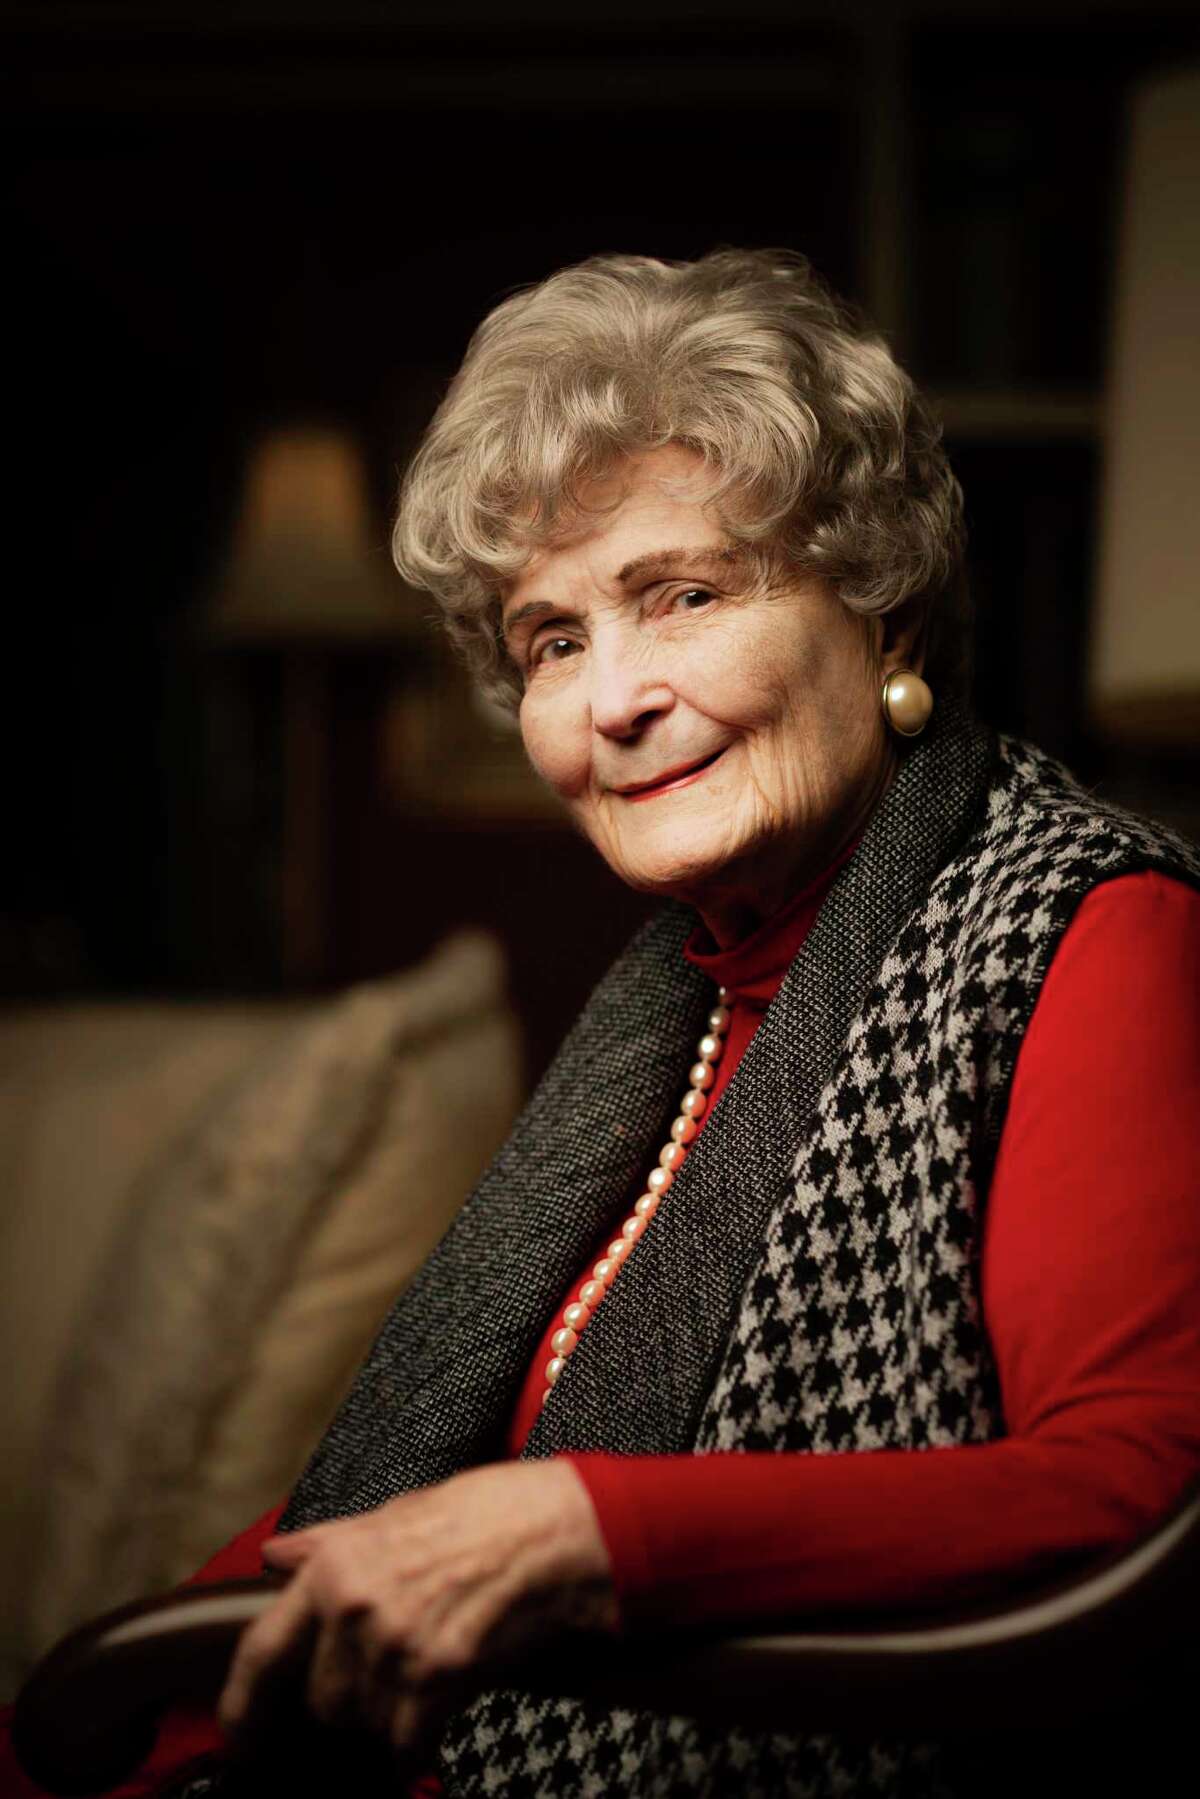 Former San Antonio mayor, Lila Cockrell, wrote her autobiography, “Love Deeper Than a River,” which was published in 2019.